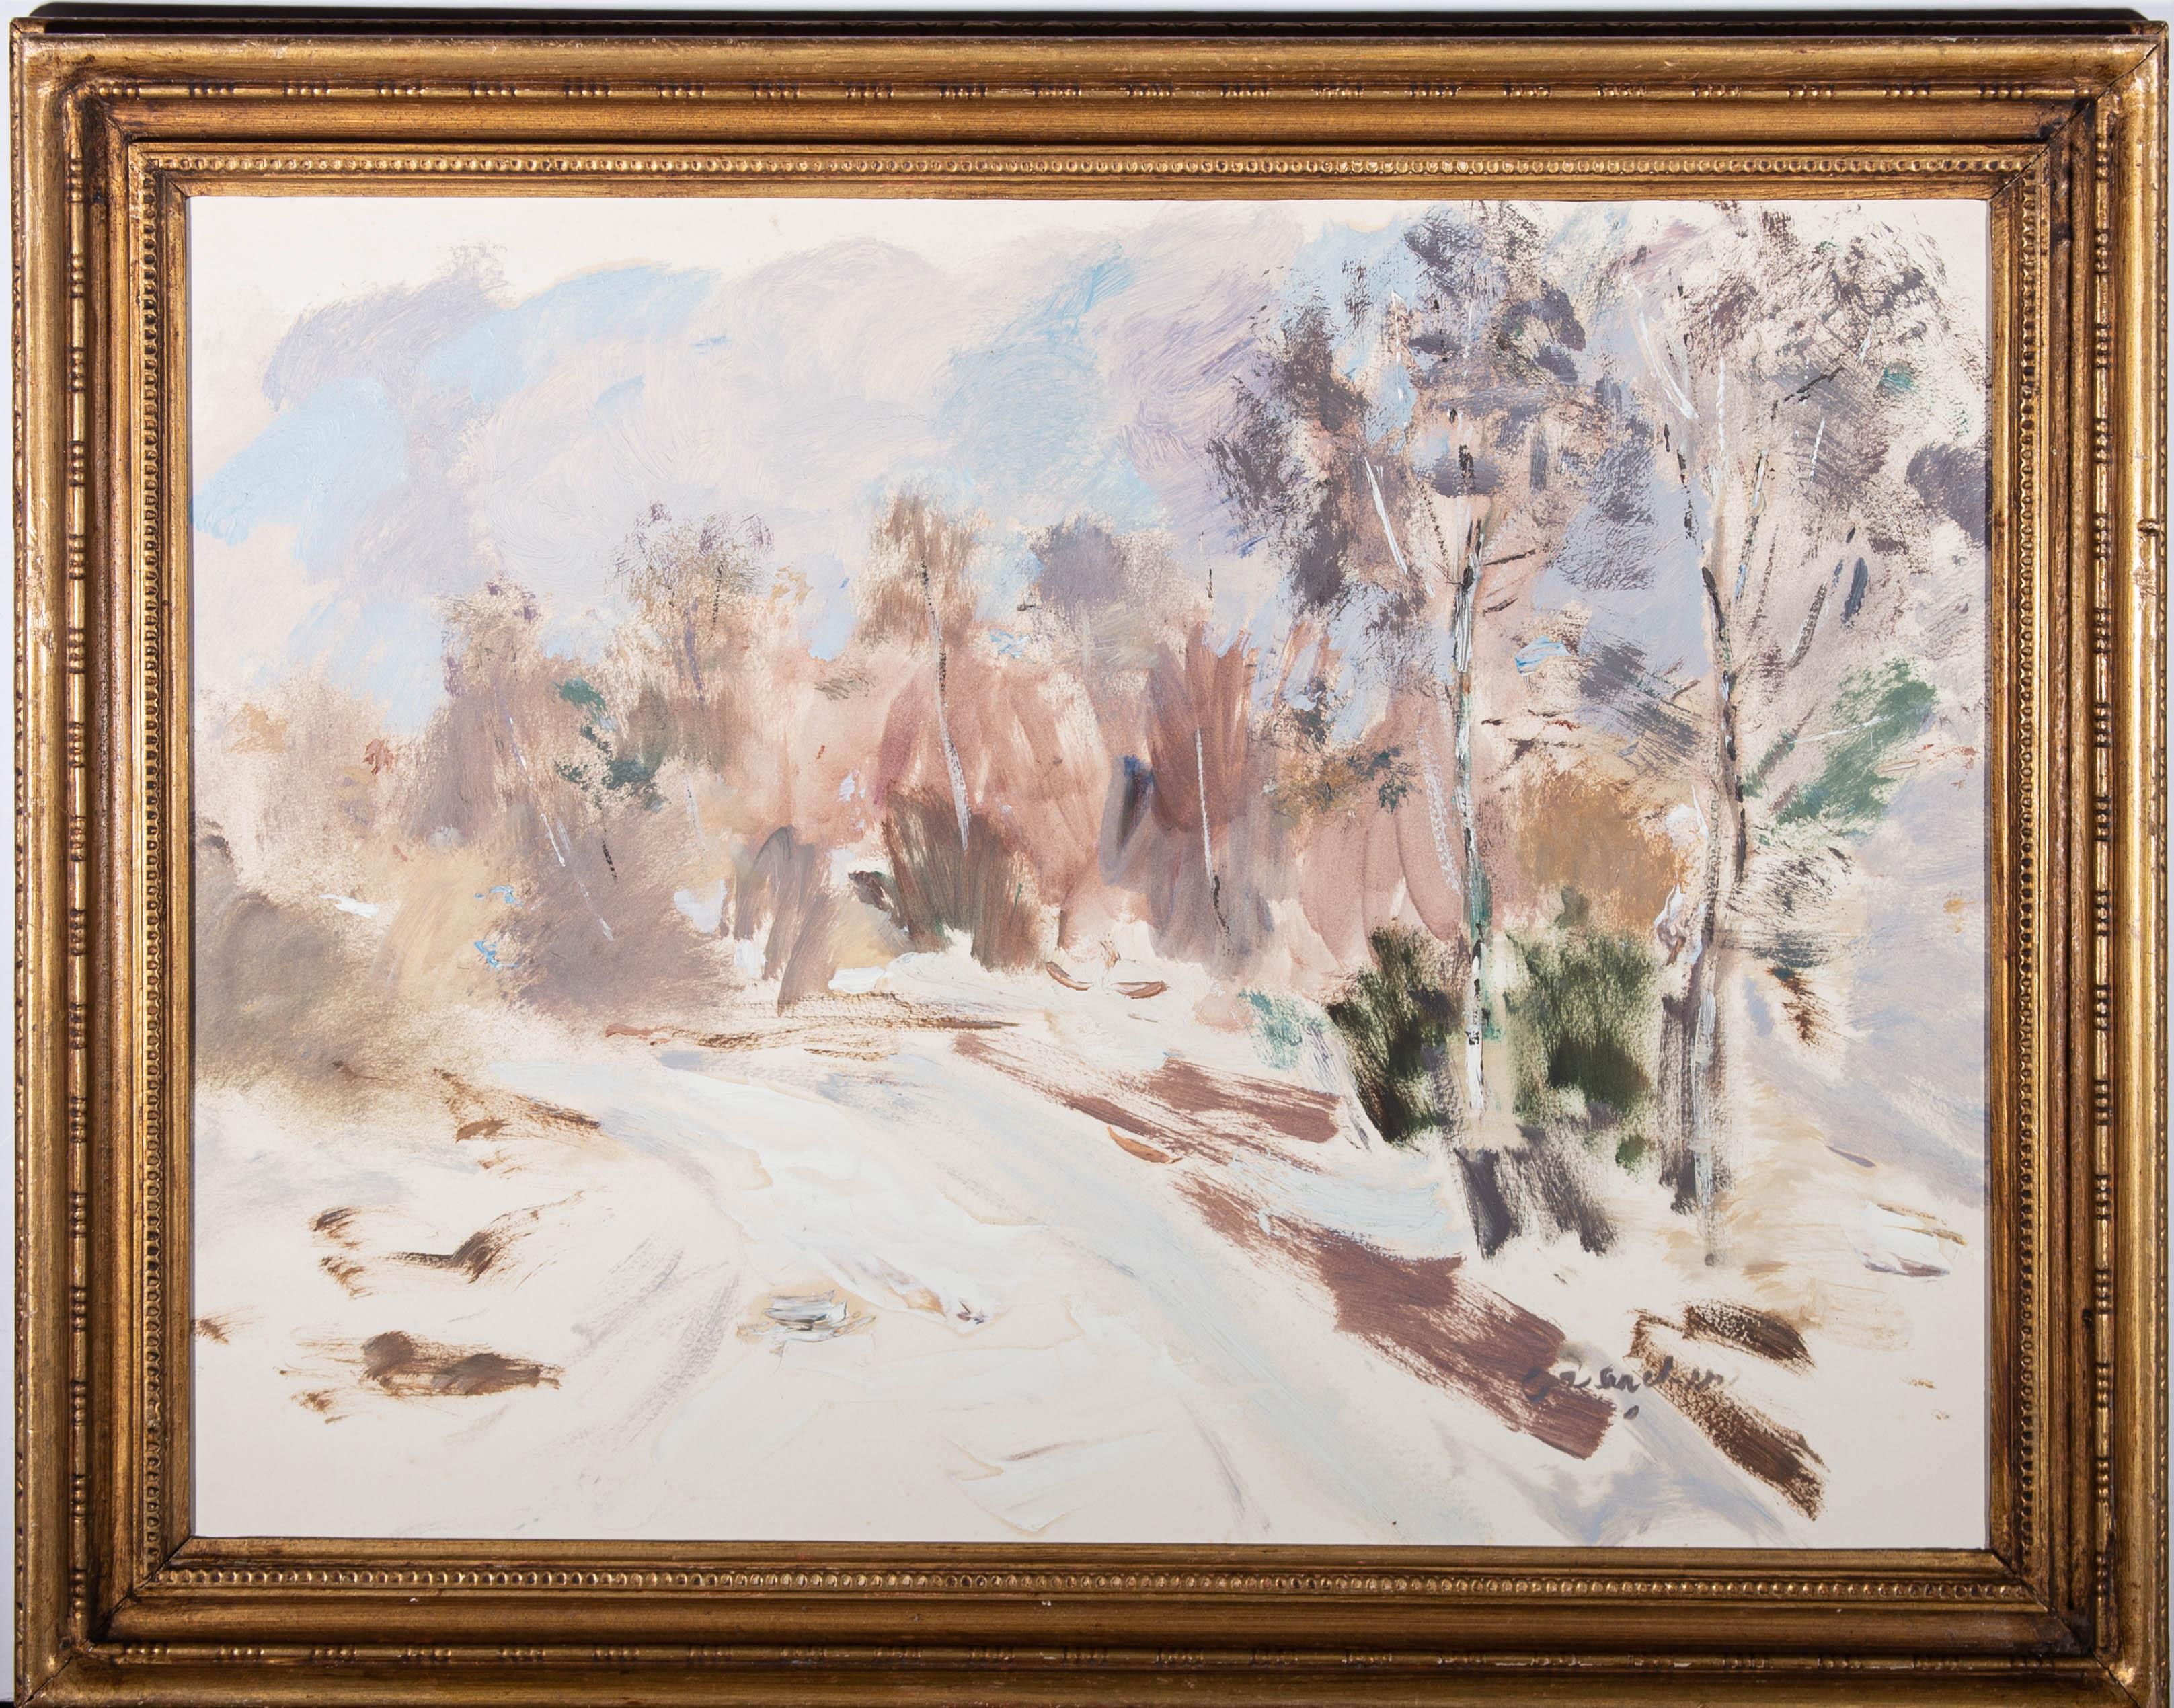 A fine oil painting by the French artist Jean-Baptiste Grancher, depicting a winter forest scene. Signed to the lower right-hand corner. There is a label attached on the reverse with some of the artist's biographical details. Presented in an ornate,